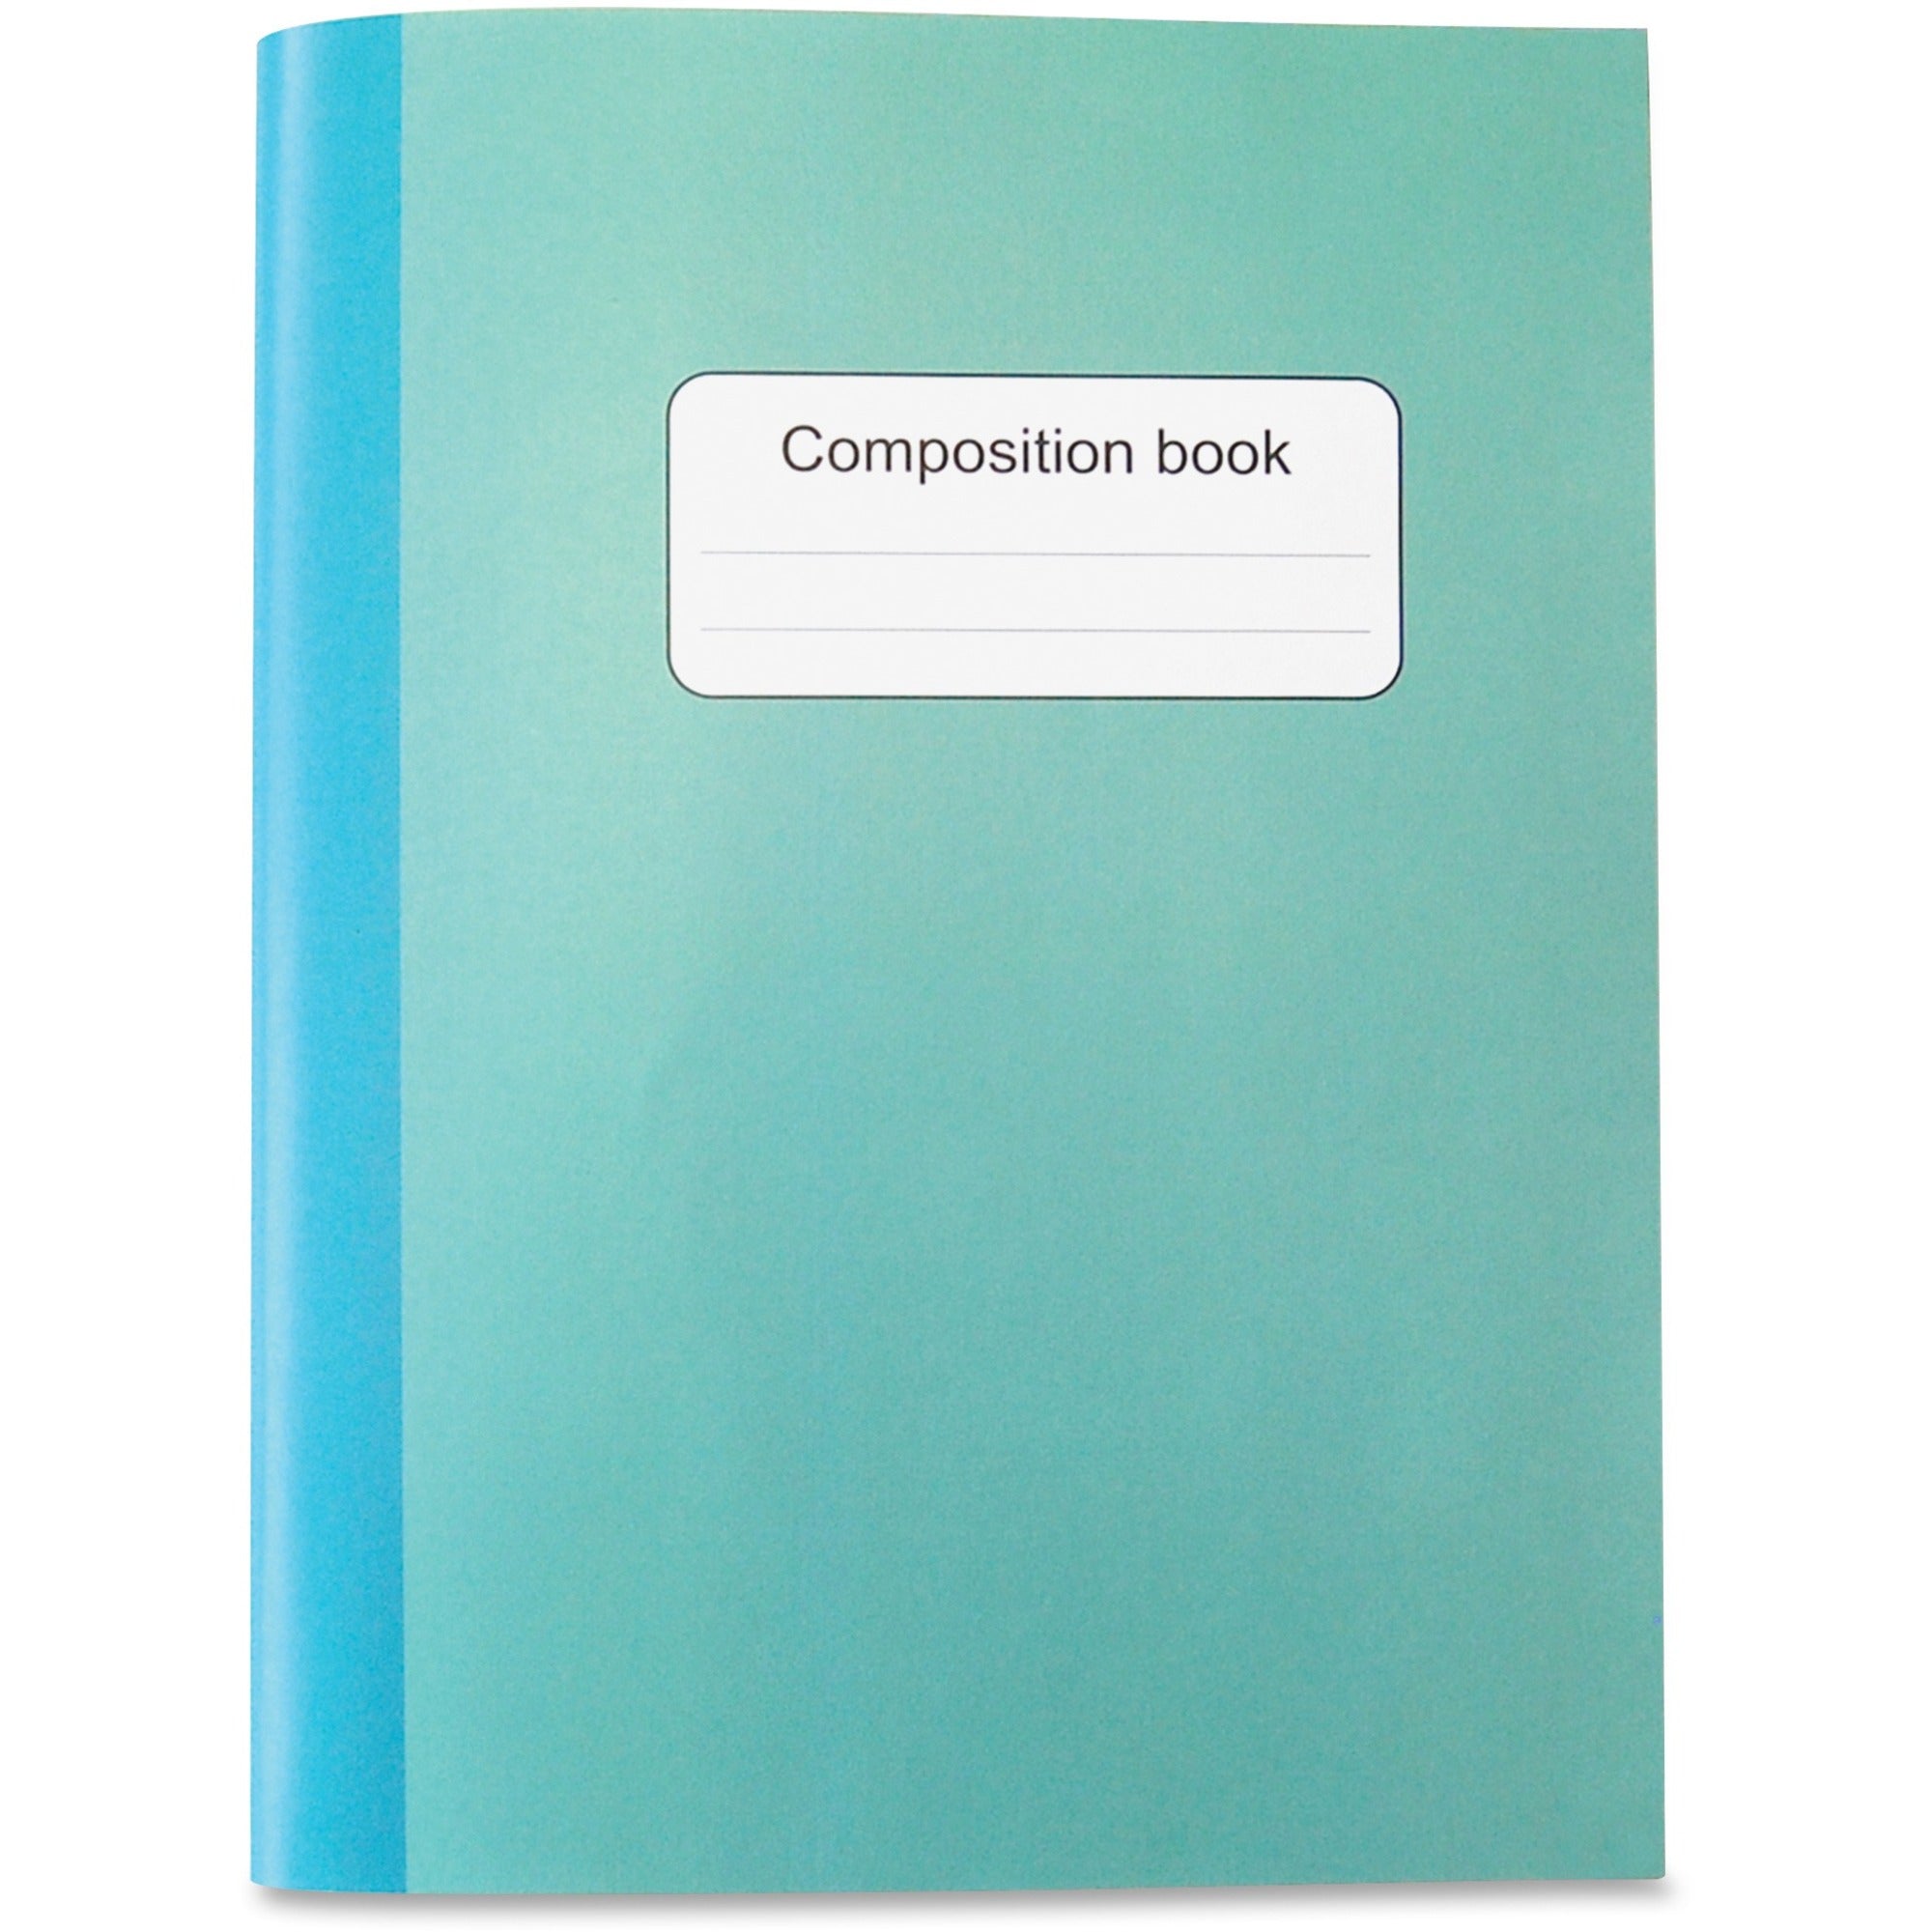 Sparco College-ruled Composition Book - 80 Sheets - Stitched - College Ruled - 15 lb Basis Weight - 9.75" x 7.5" x 10" - Blue, Green Cover - Sturdy Cover - Recycled - 1 Each - 